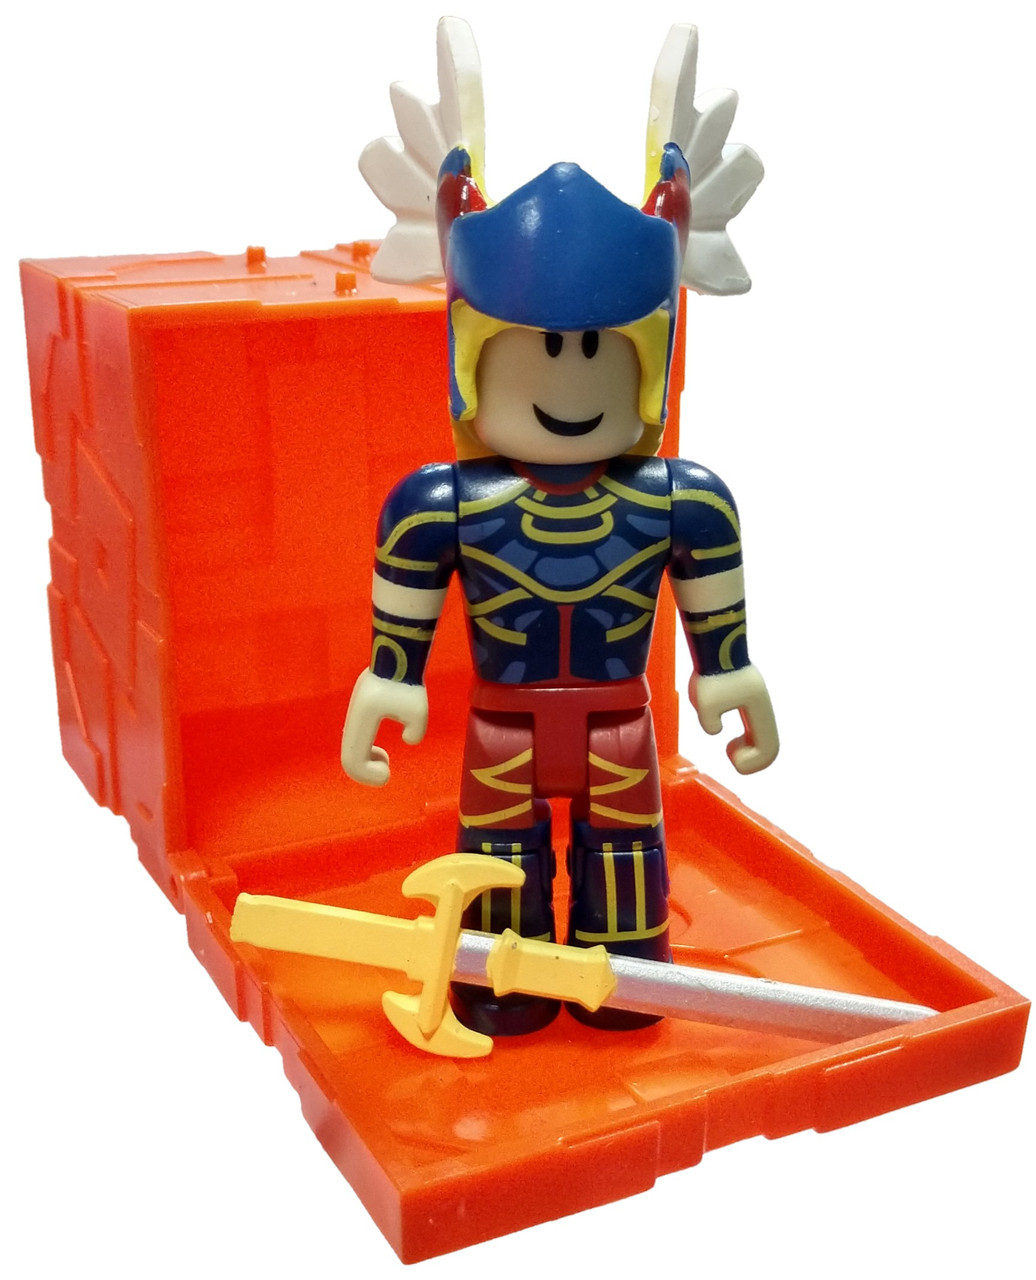 Roblox Series 6 Summoner Tycoon Valkyrie 3 Mini Figure With Orange Cube And Online Code Loose Jazwares Toywiz - roblox toys series 6 codes